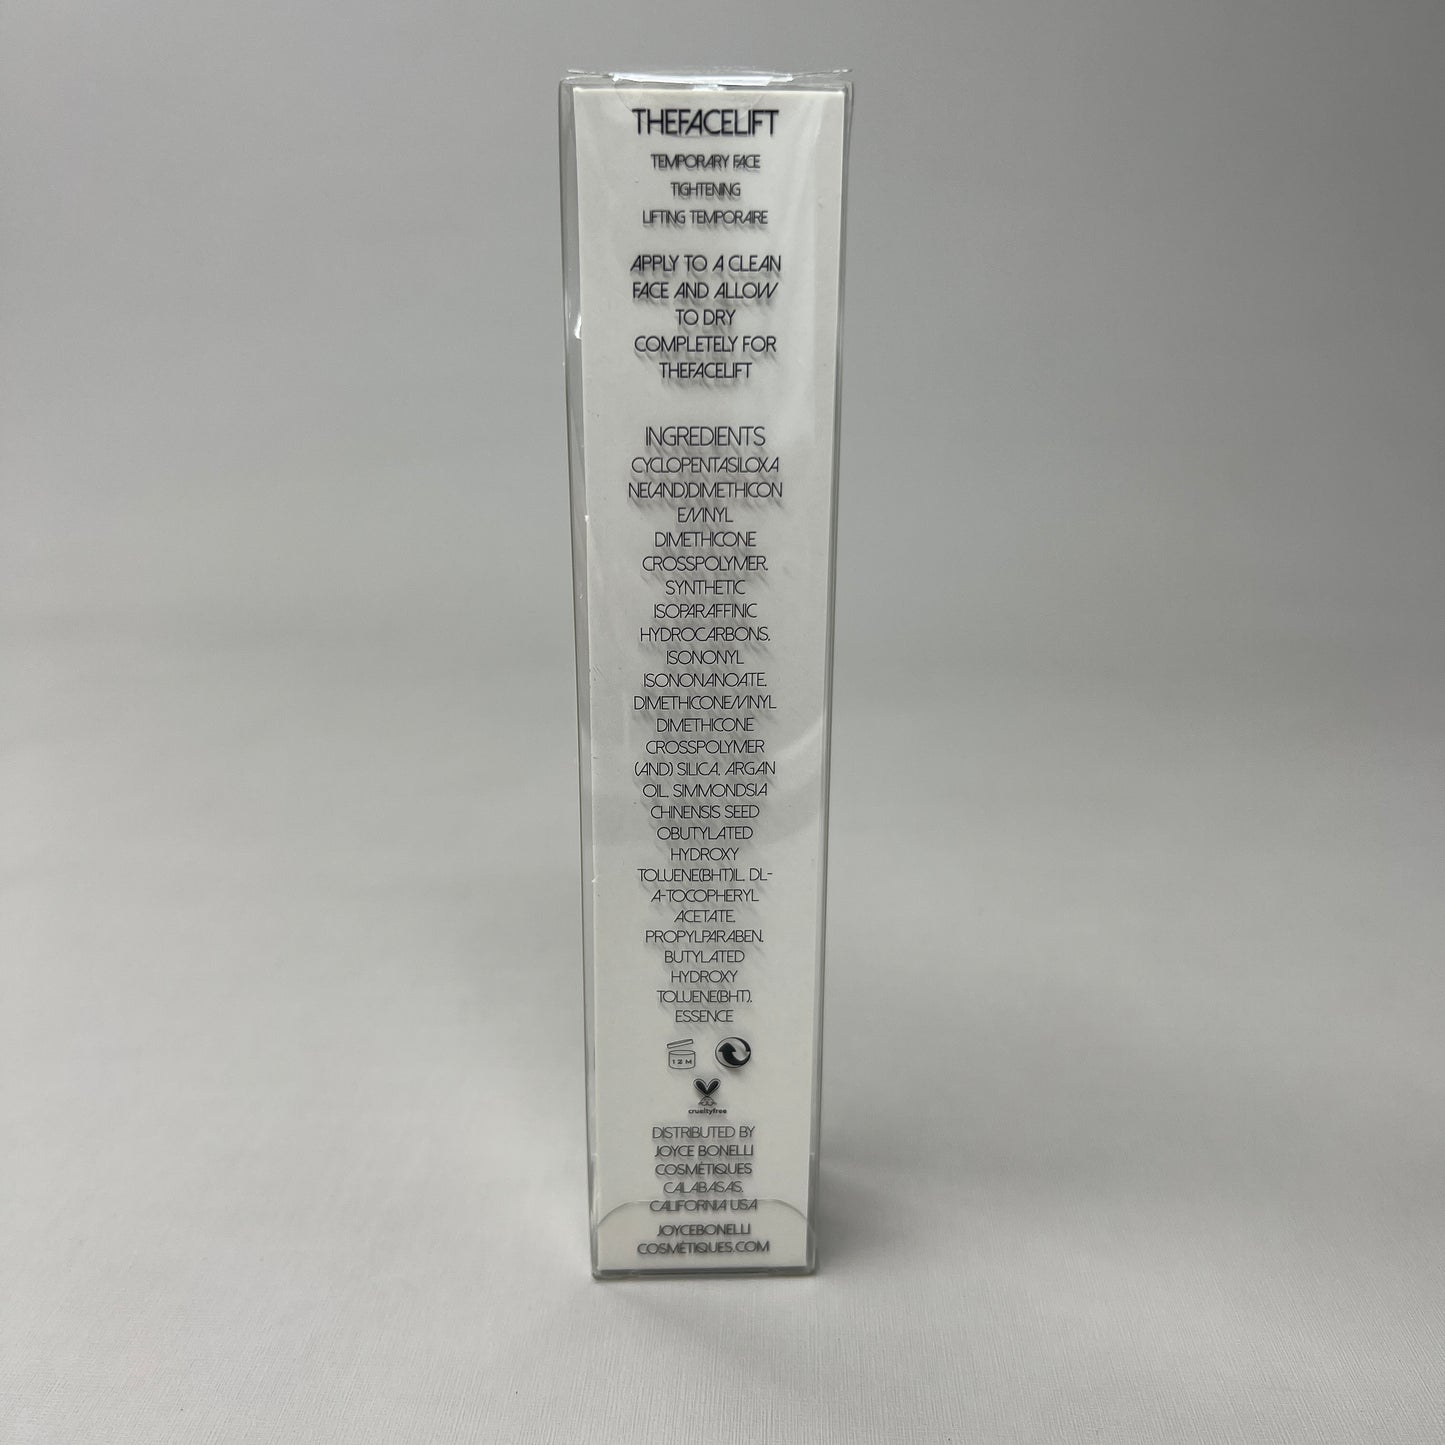 THE FACE LIFT Temporary Face Tightening Concentrate 4 oz (NEW)